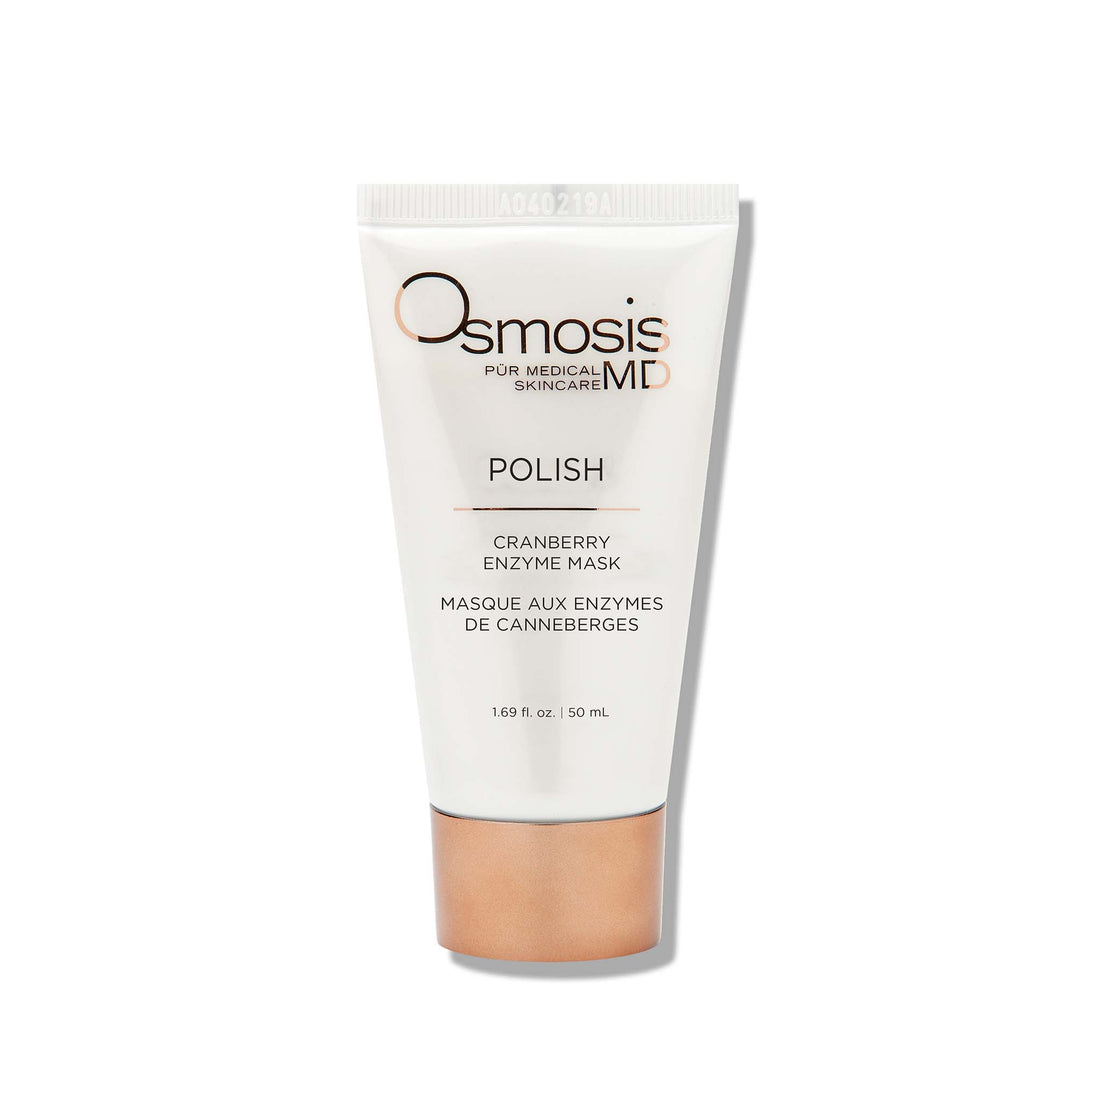 Osmosis Skincare MD Polish Enzyme Mask is an exfoliating mask that improves skin texture, leaving skin healthy and glowing.